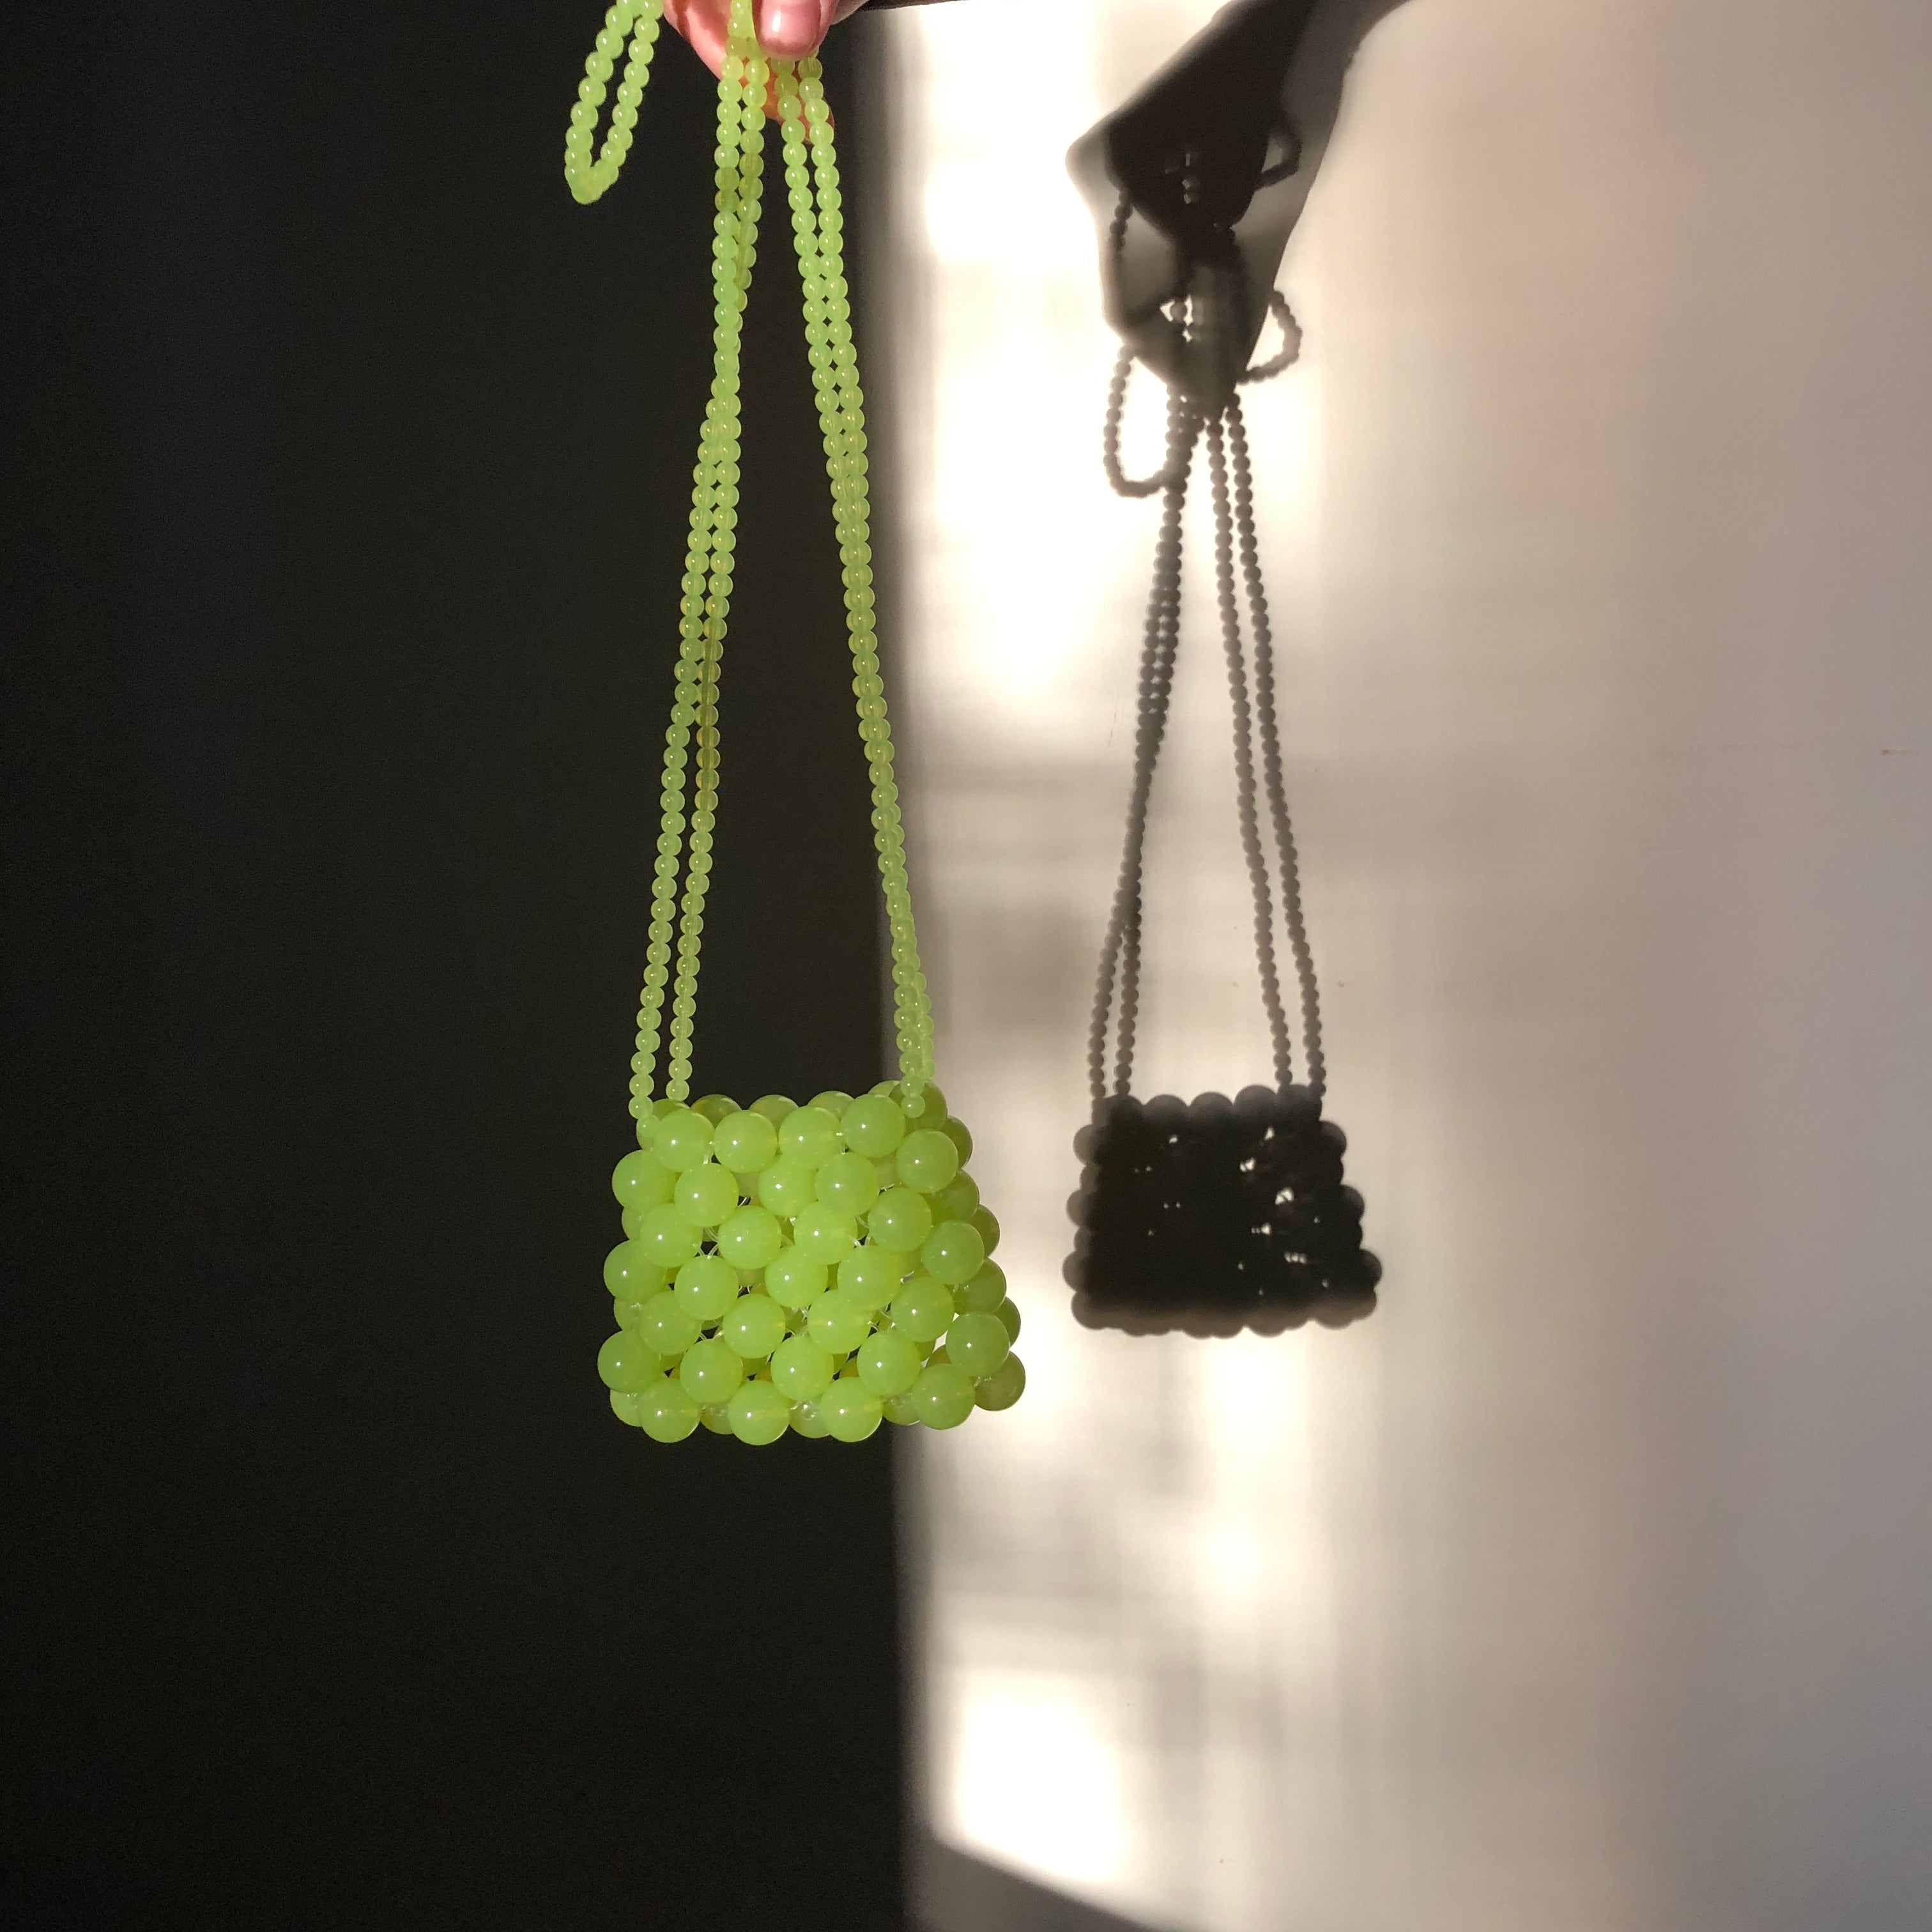 The Maggie Micro Sling Bag by Veronique